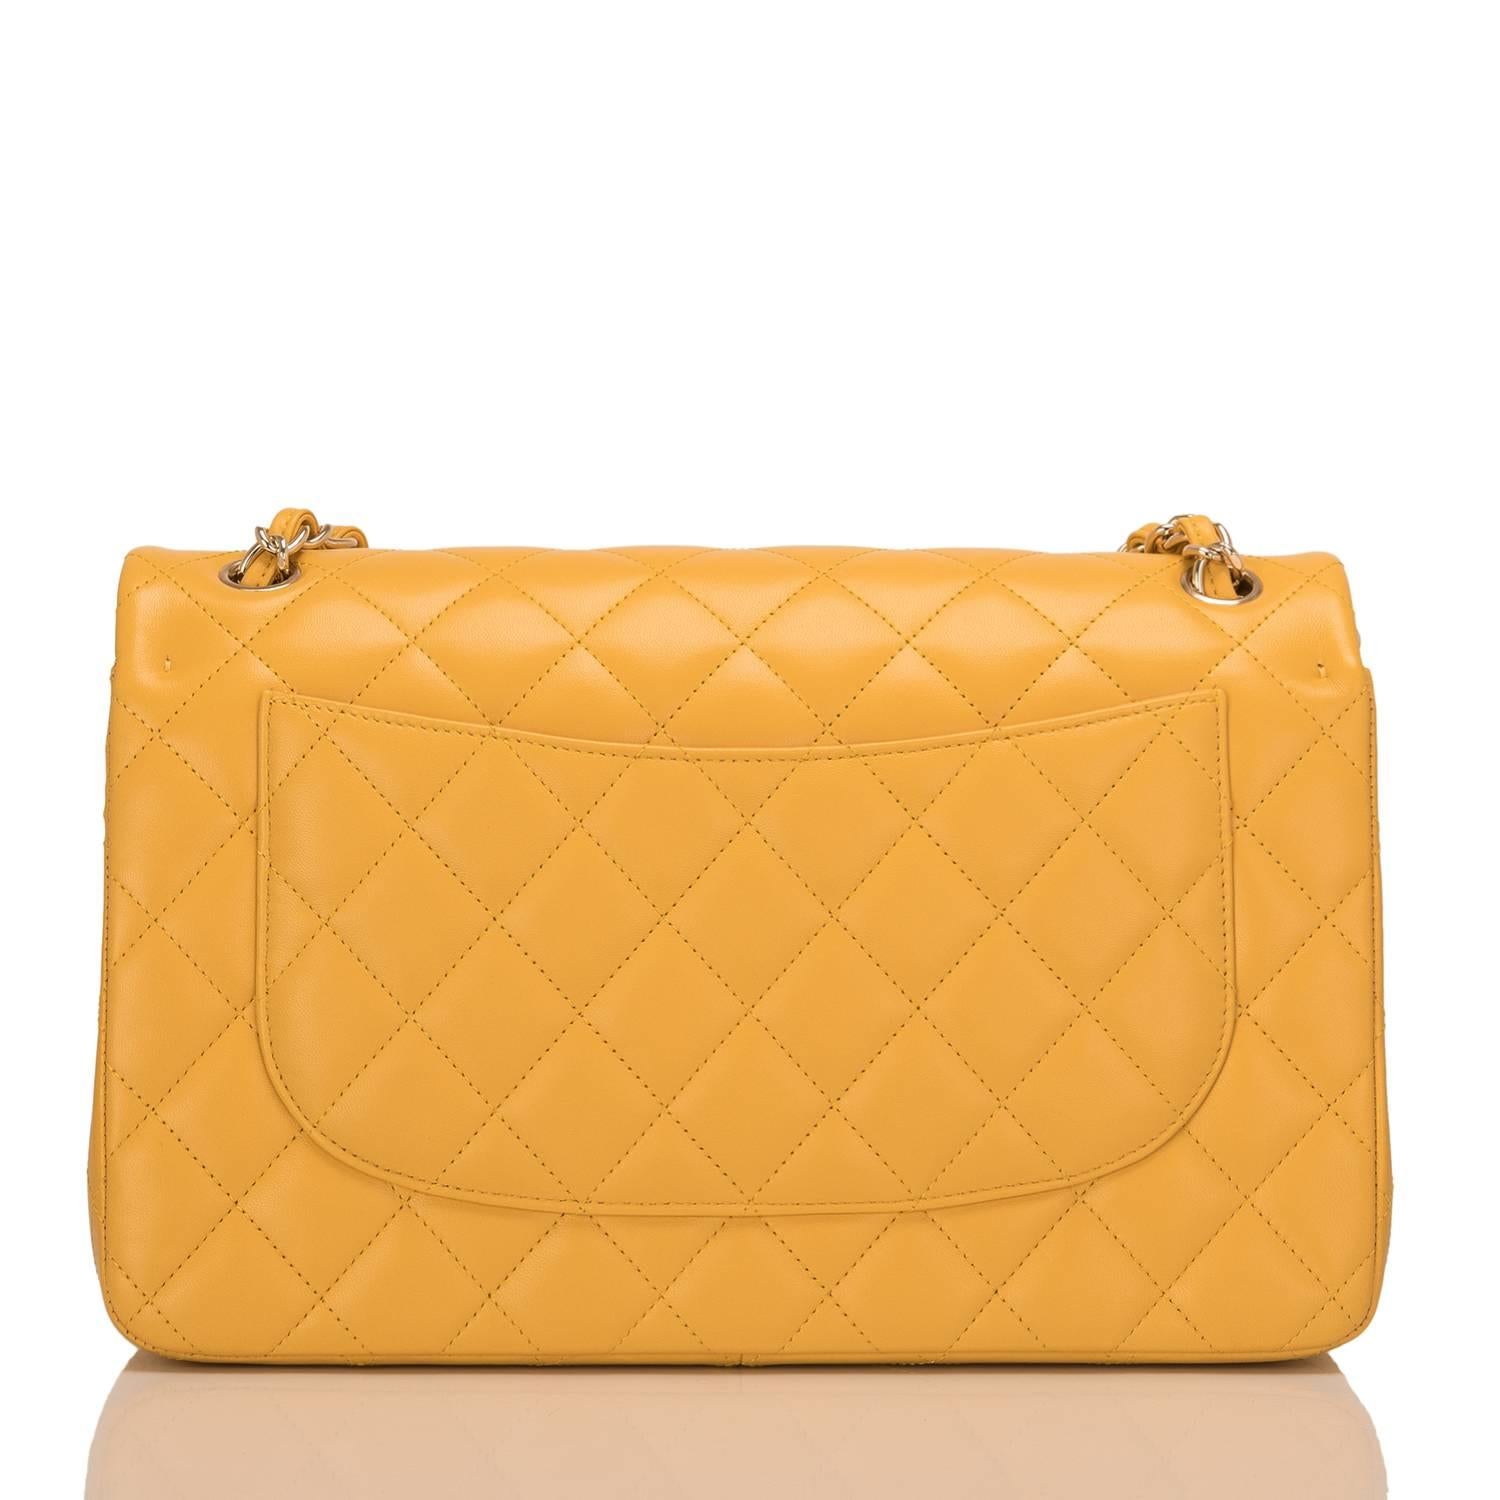 chanel yellow quilted lambskin jumbo classic flap bag